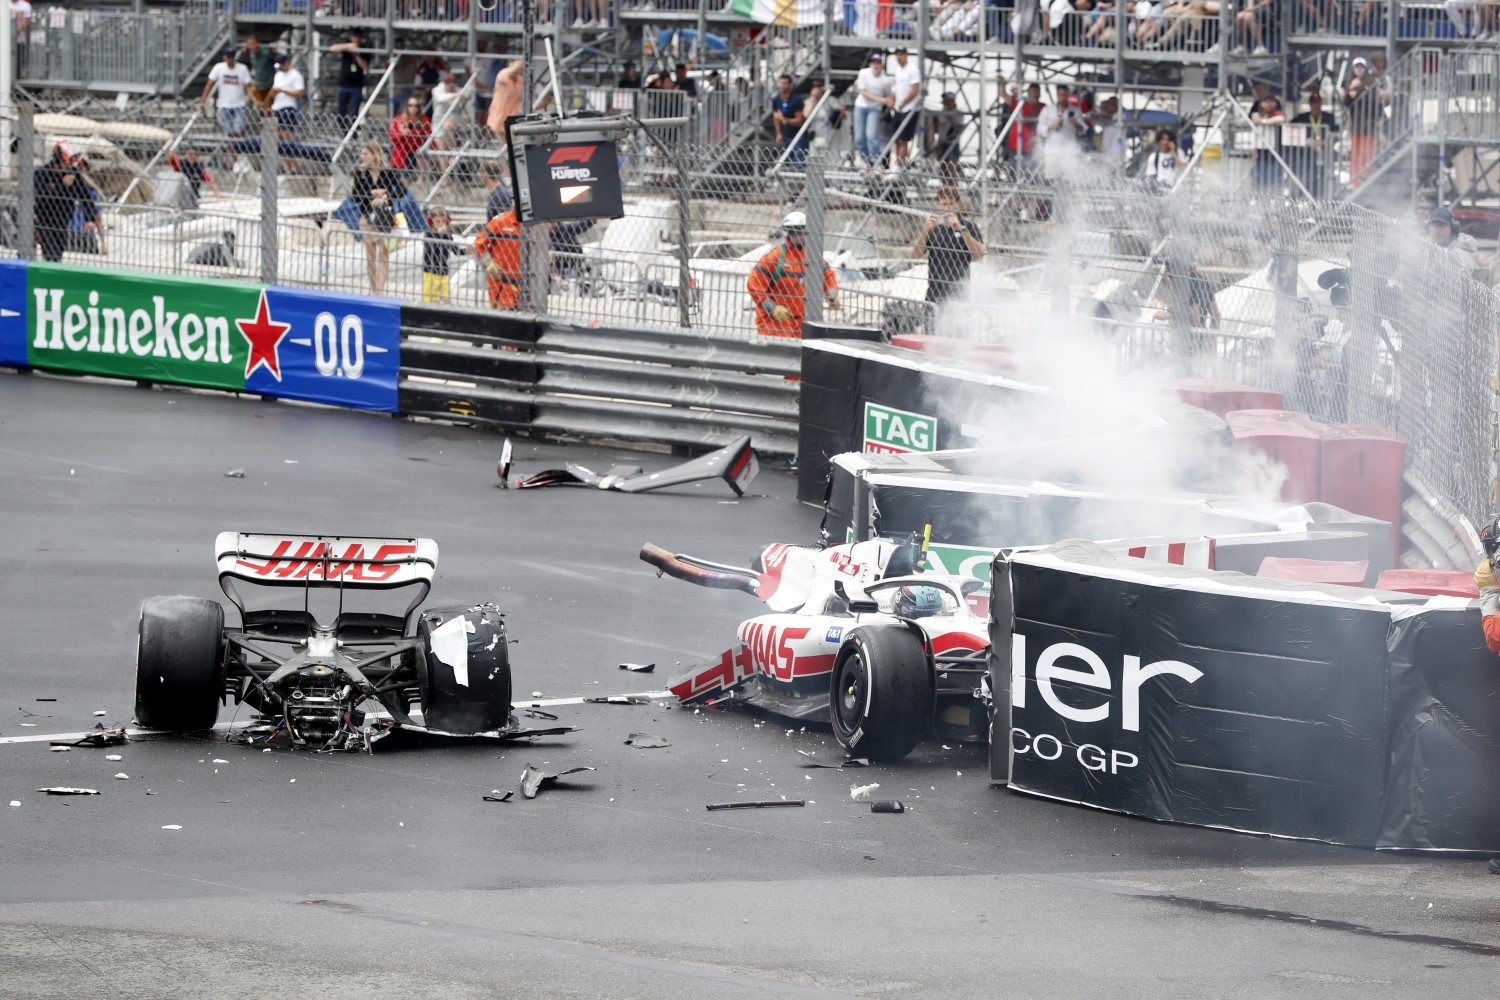 Mick Schumacher, Haas VF-22 crash during the Monaco GP at Circuit de Monaco on Sunday May 29, 2022 in Monte Carlo, Monaco. (Photo by Steven Tee / LAT Images for HAAS F1)